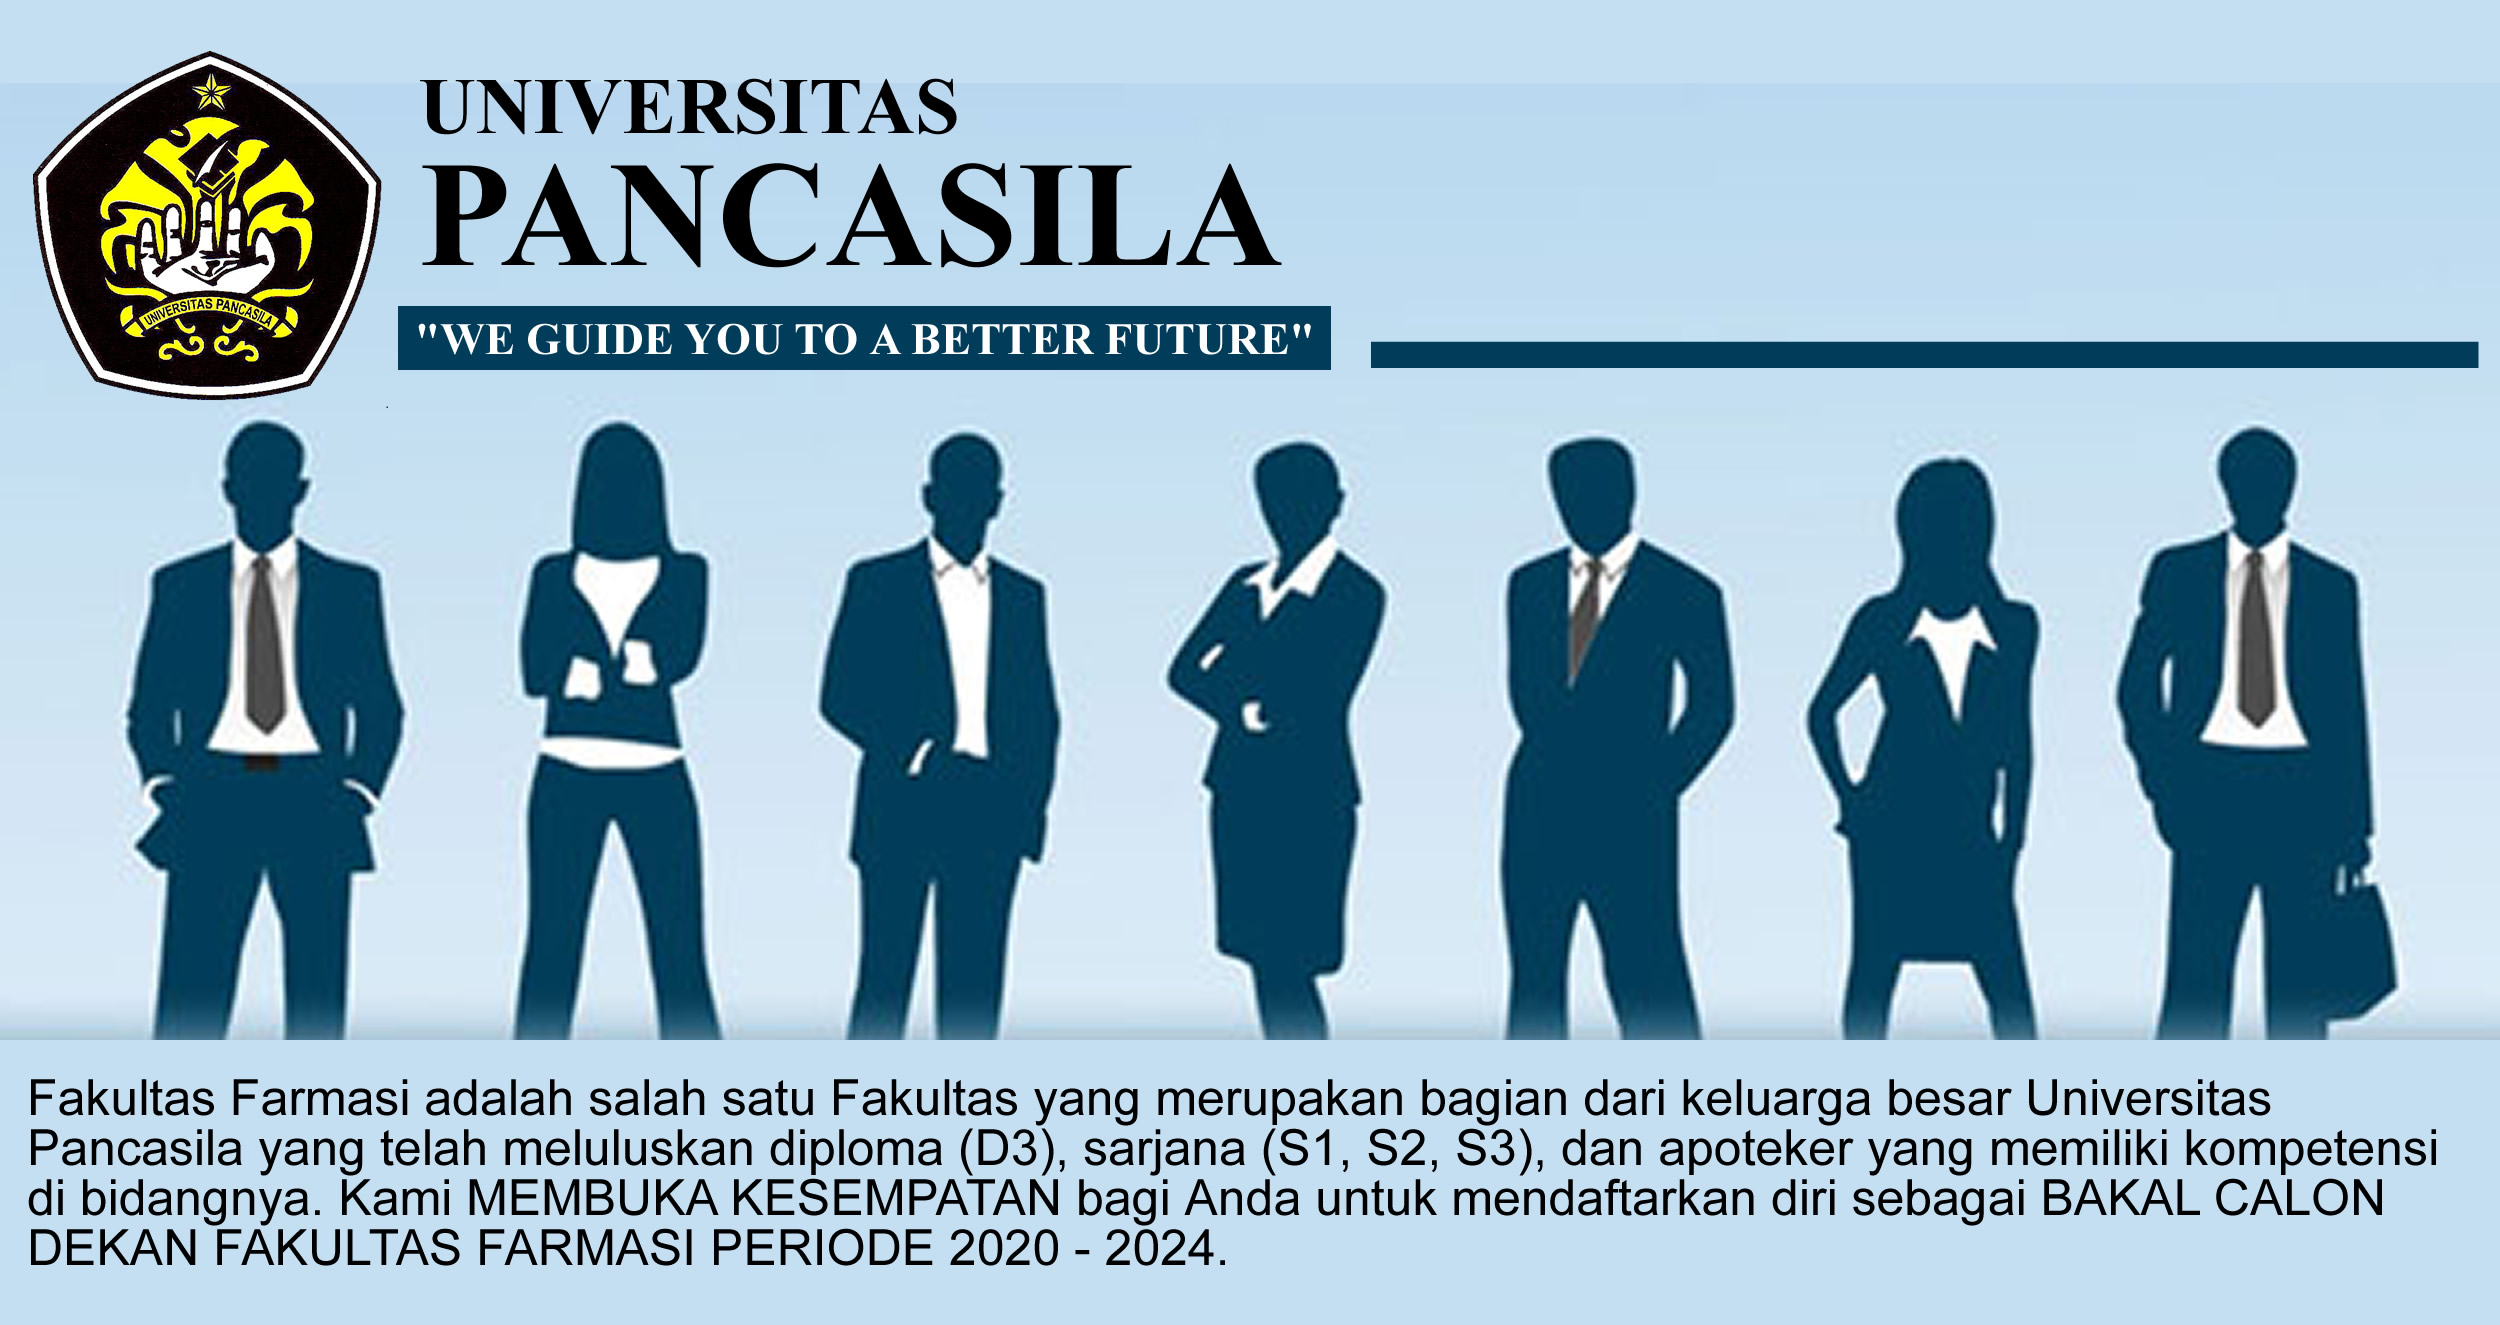 Information on the Opportunity to Become Dean of the Faculty of Pharmacy, Pancasila University